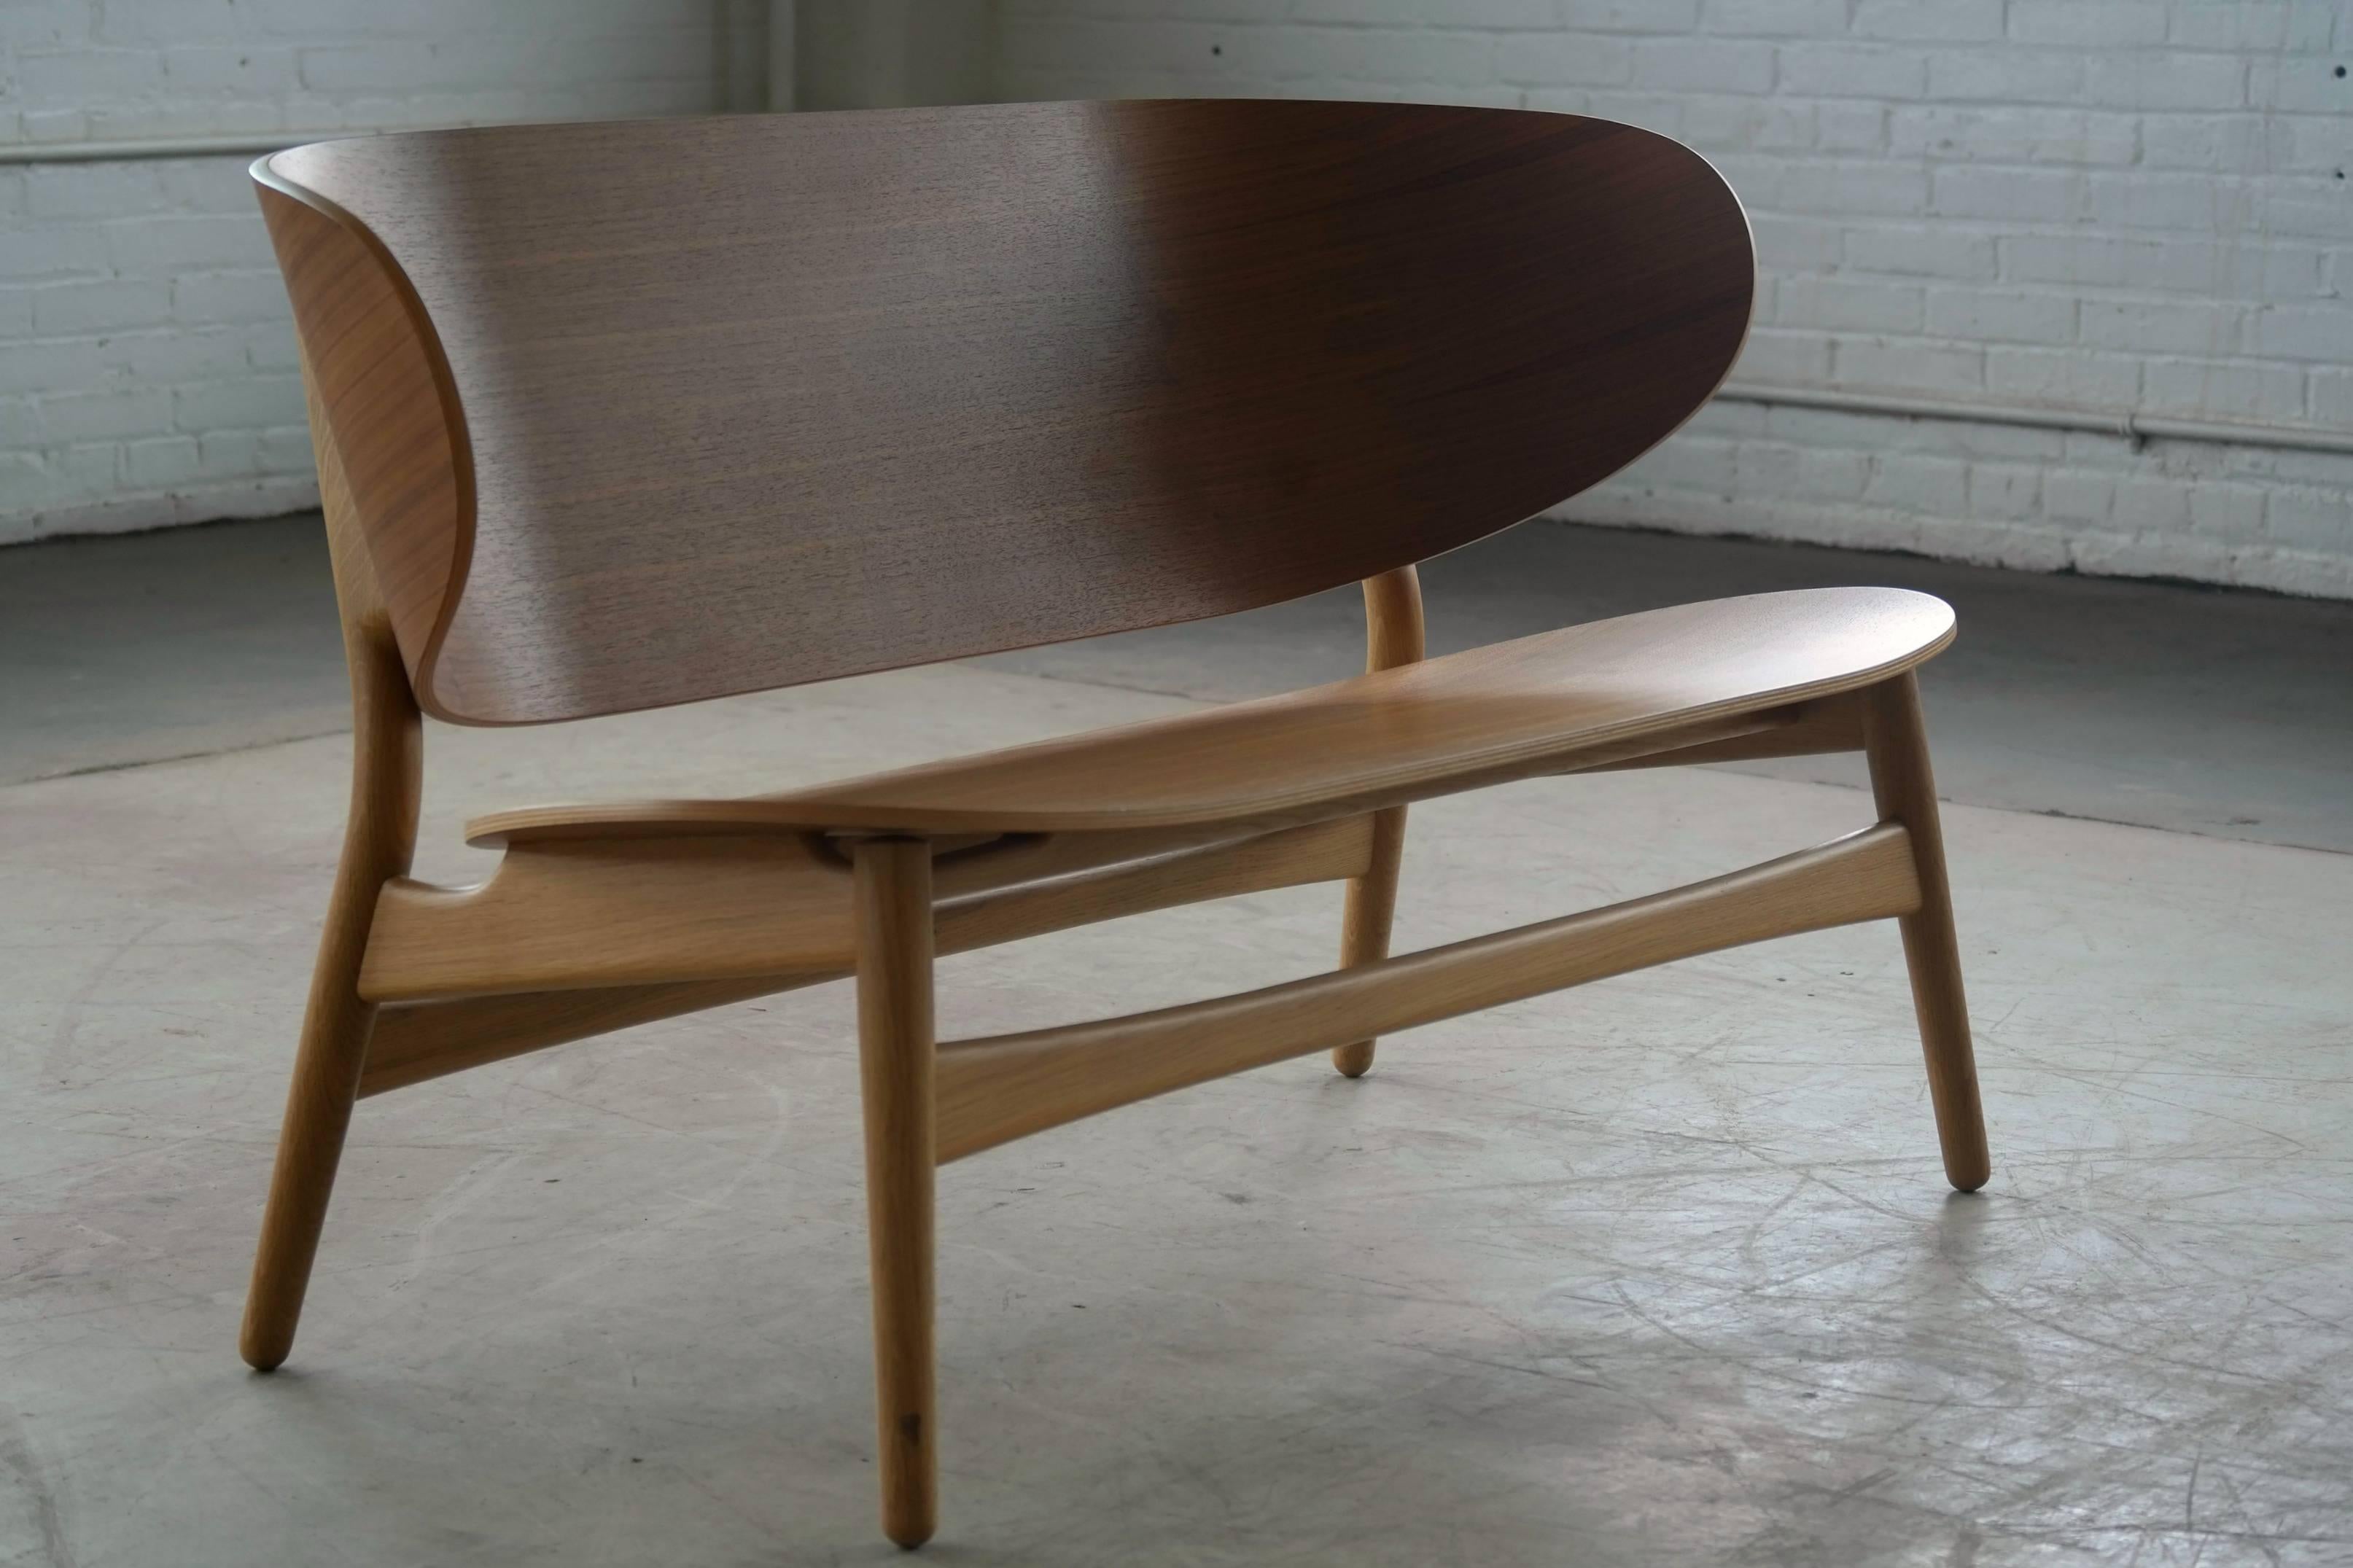 Beautiful shell bench originally designed by Hans Wegner in 1948 and re-issued by GETAMA for which Hans Wegner was a house architect in 2015.

Bent walnut ply over a base of soap treated solid oak. This piece was used as display and could have